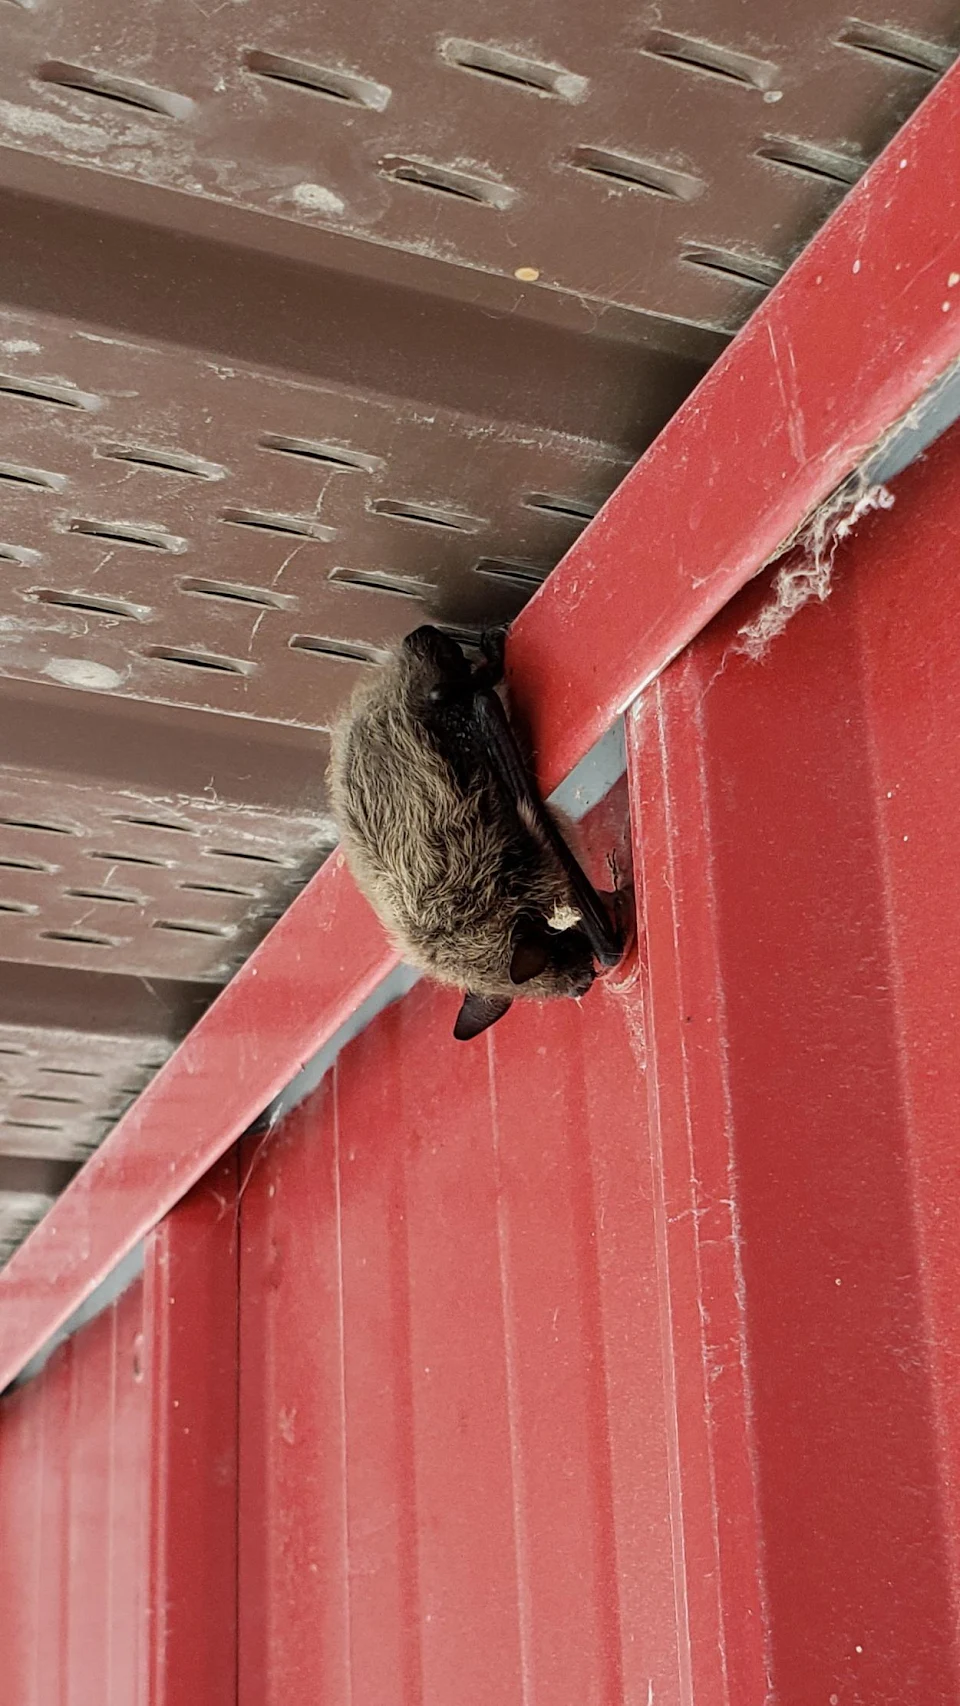 I don't know if other people think bats are cute, but this little guy was hanging out at my work this morning.